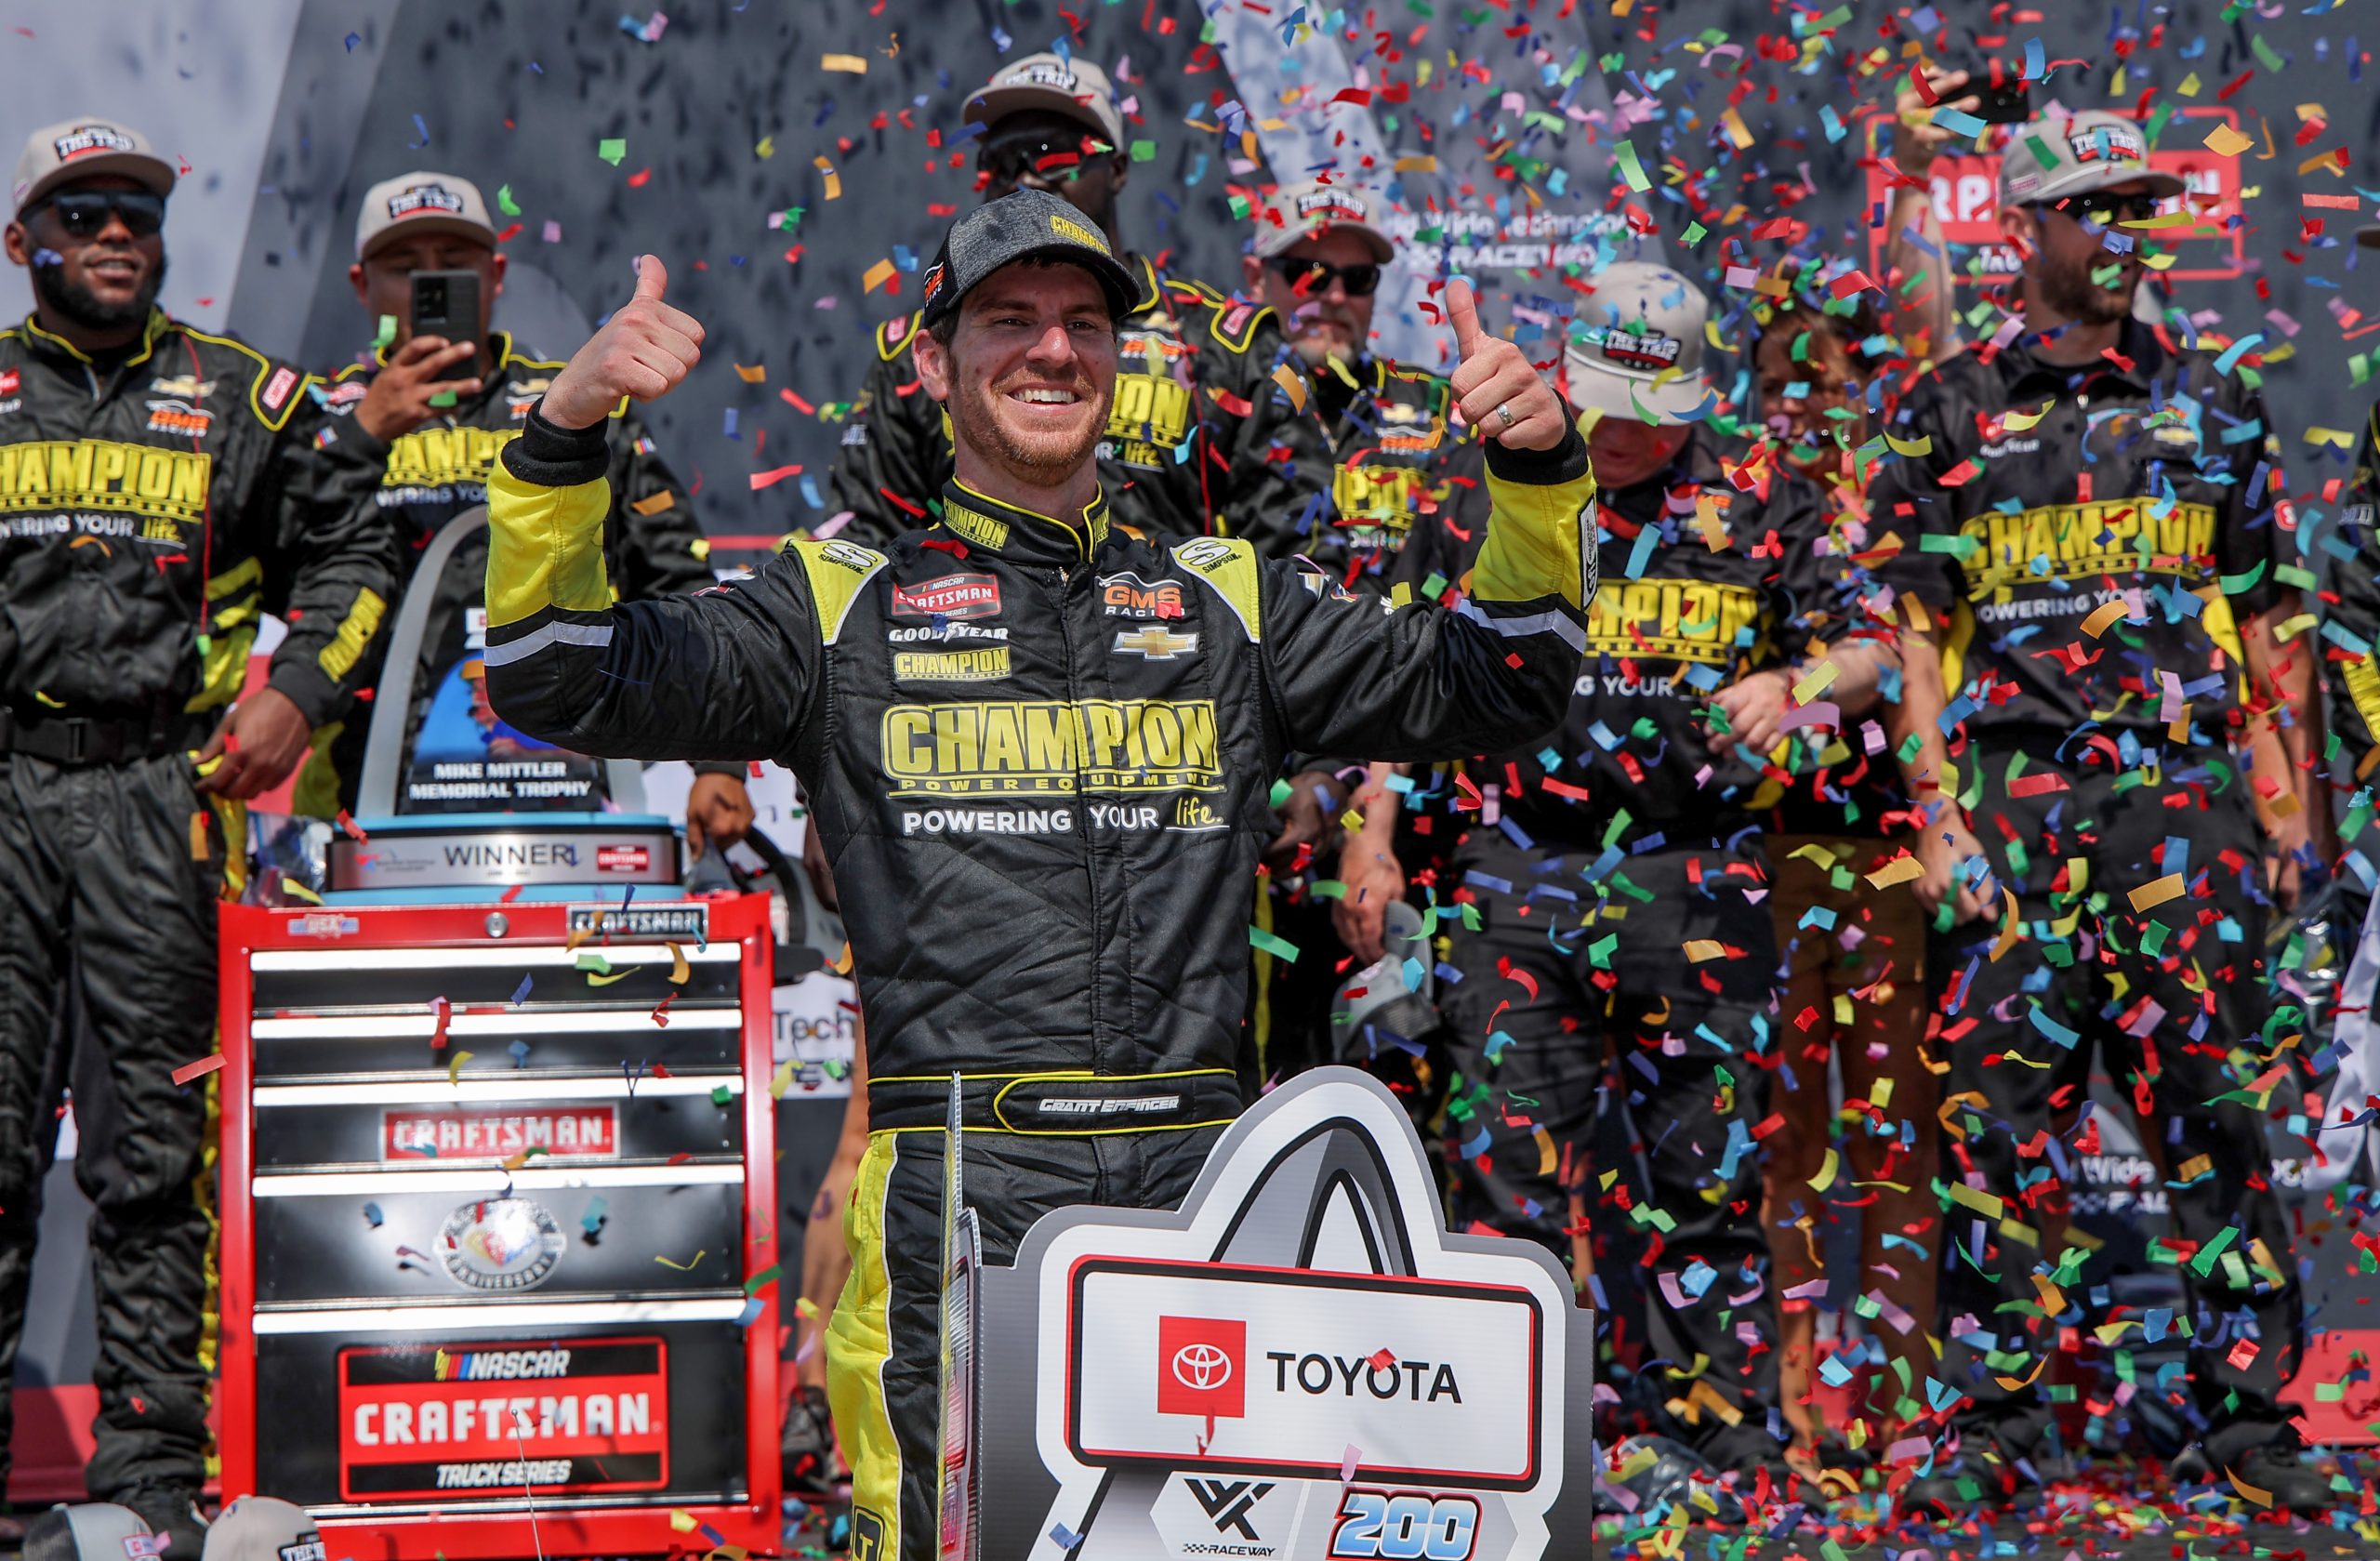 MADISON, ILLINOIS - JUNE 03: Grant Enfinger, driver of the #23 Champion Power Equipment Chevrolet, celebrates in victory lane after winning the NASCAR Craftsman Truck Series Toyota 200 at WWT Raceway on June 03, 2023 in Madison, Illinois. (Photo by Jonathan Bachman/Getty Images)